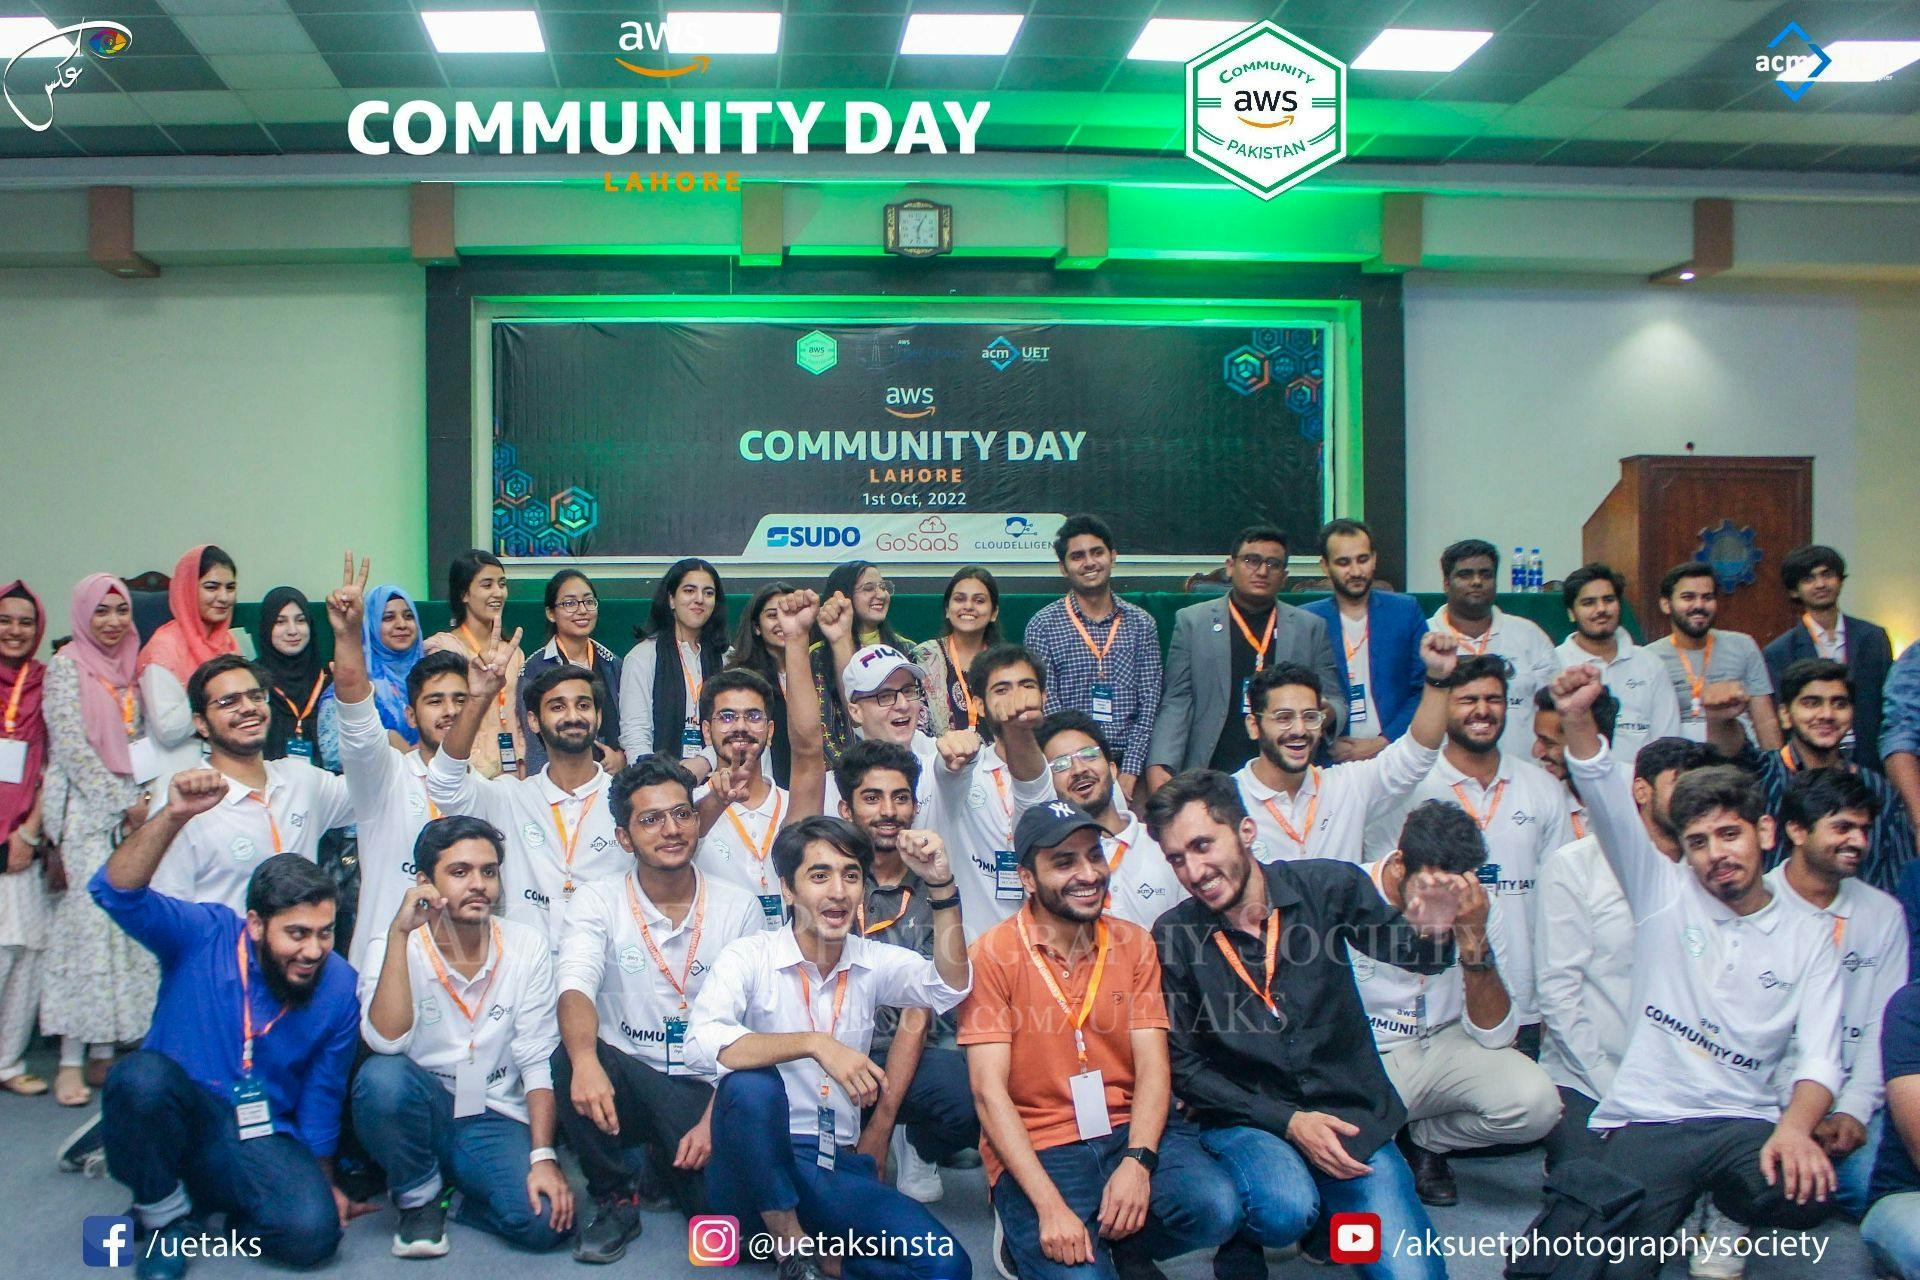 Sharjeel Yunus at AWS Community Day with AWS Community Day team